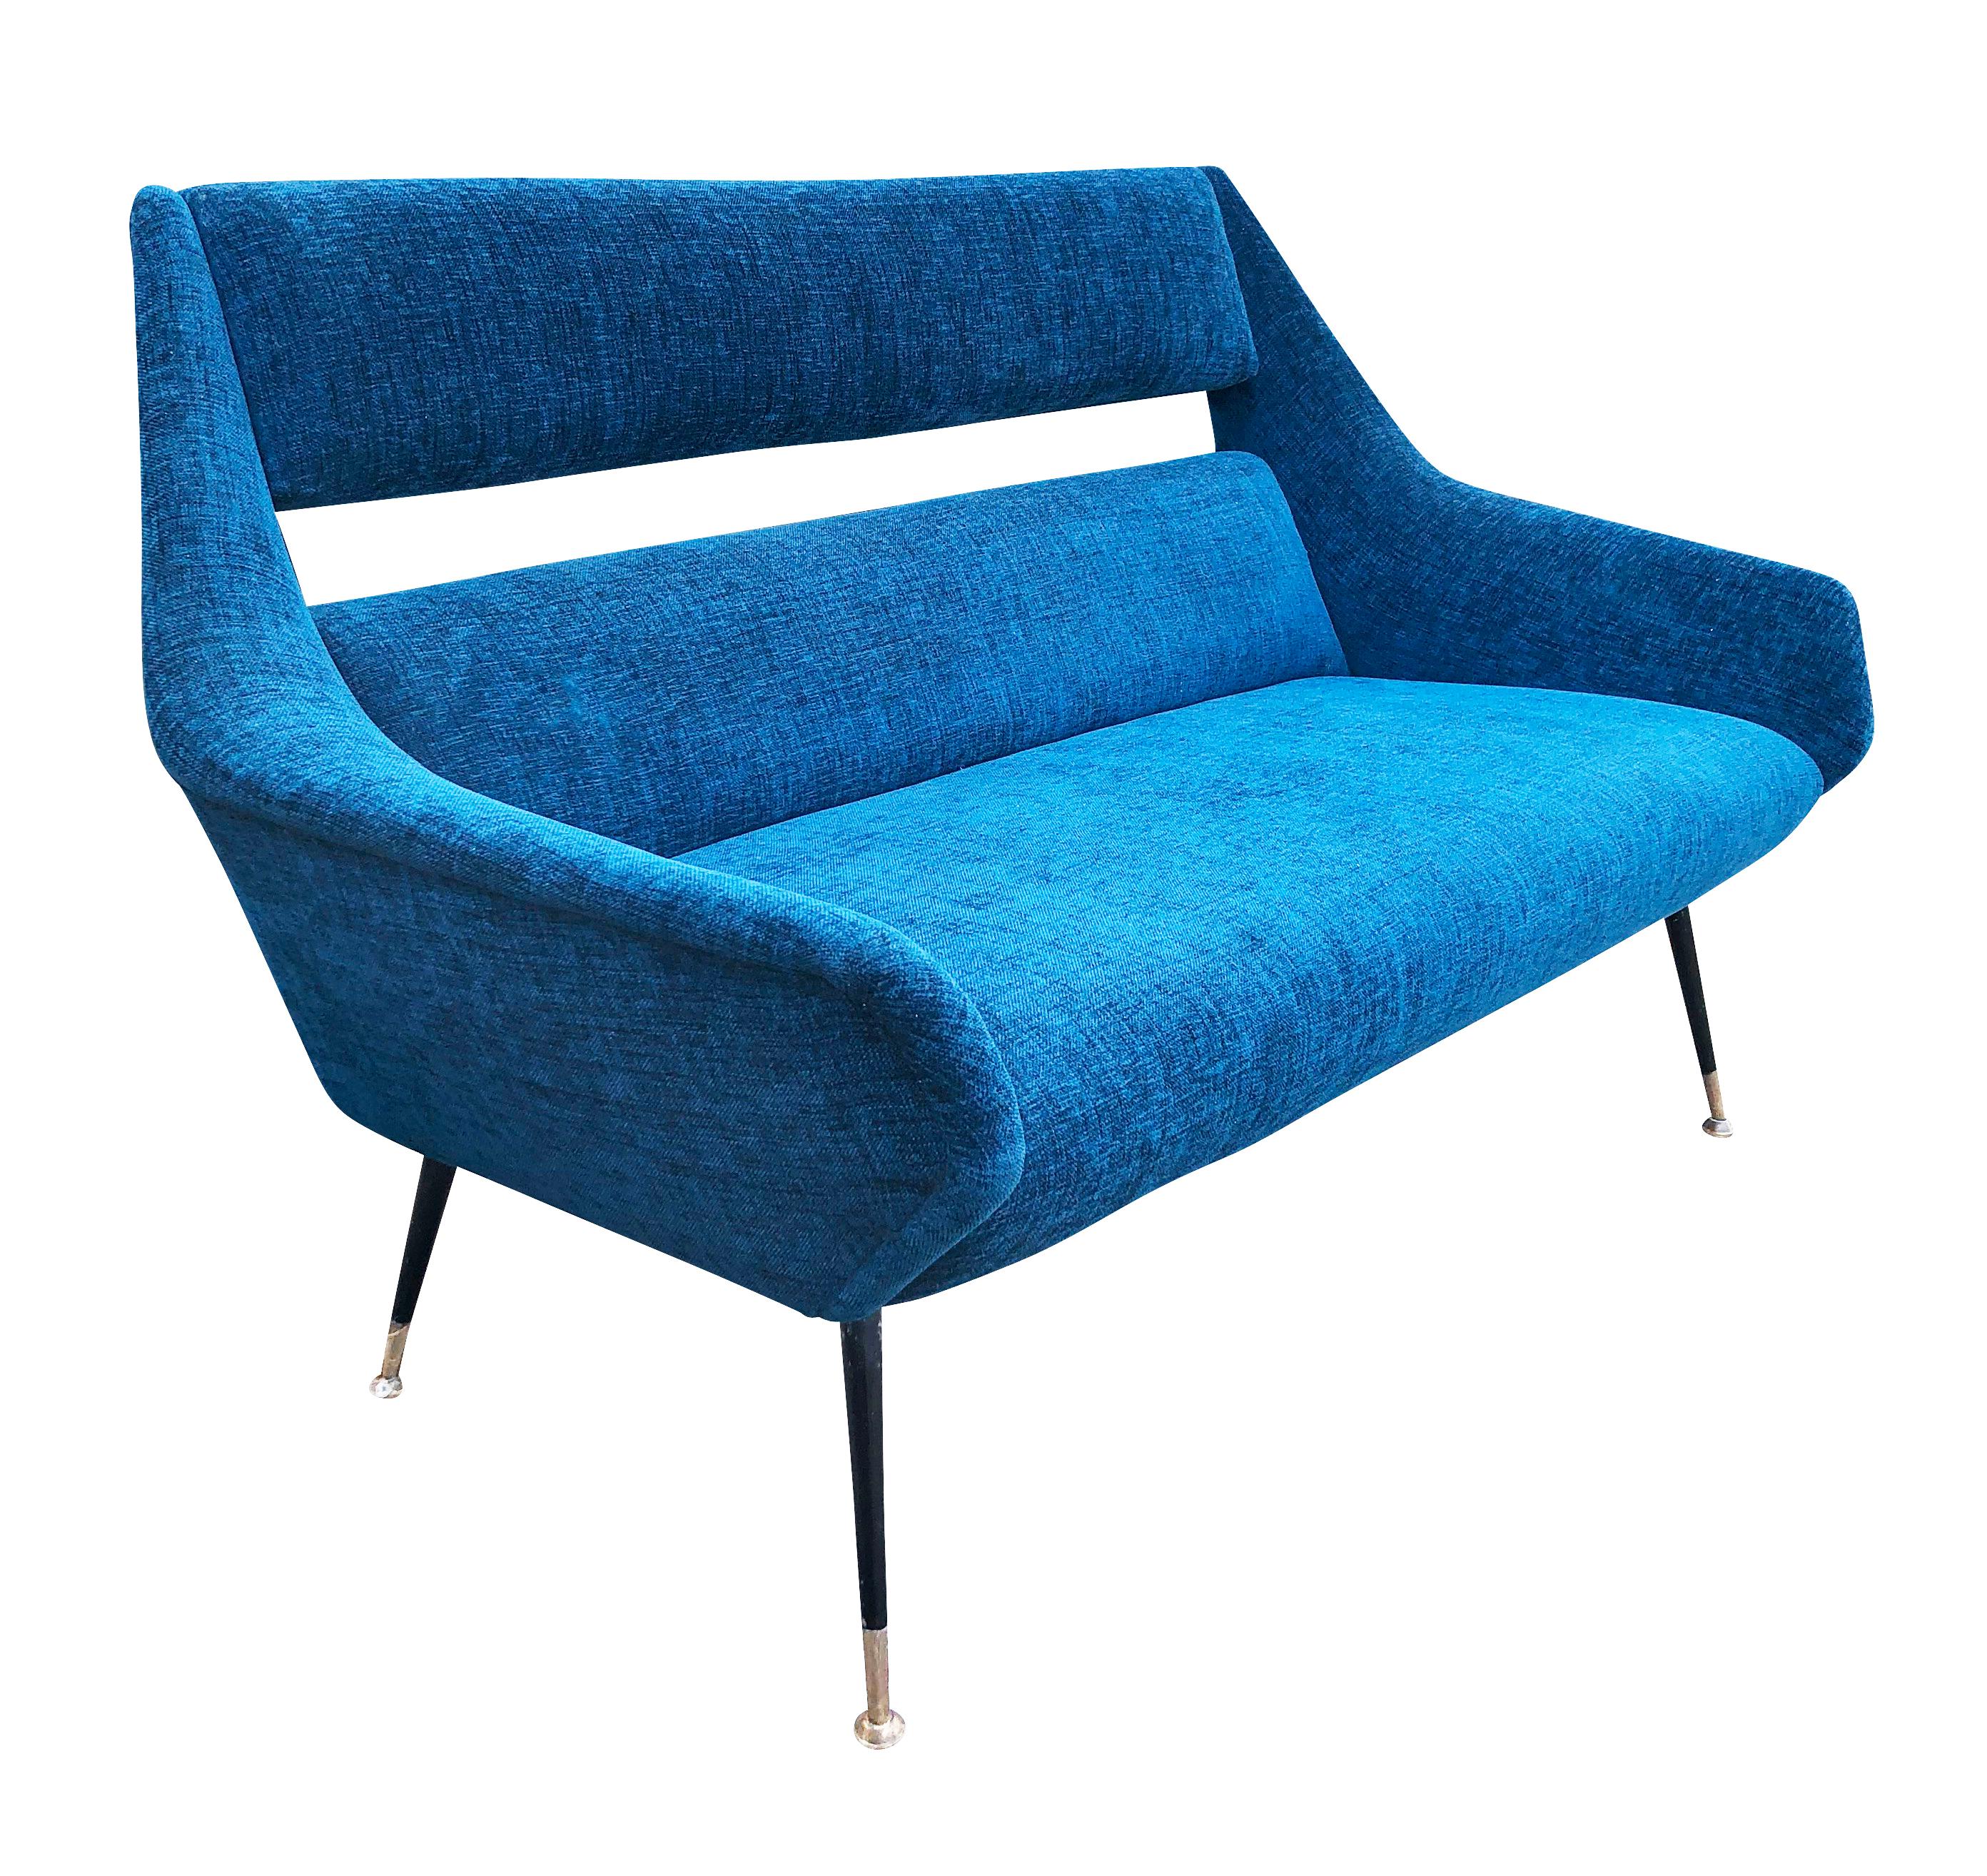 Midcentury loveseat by Gigi Radice for Minotti. An iconic design with the very recognizable slit back and brass lags. Recovered in a blue fabric. Two lounge chairs from the same set also available.

Condition: Minor wear consistent with age and